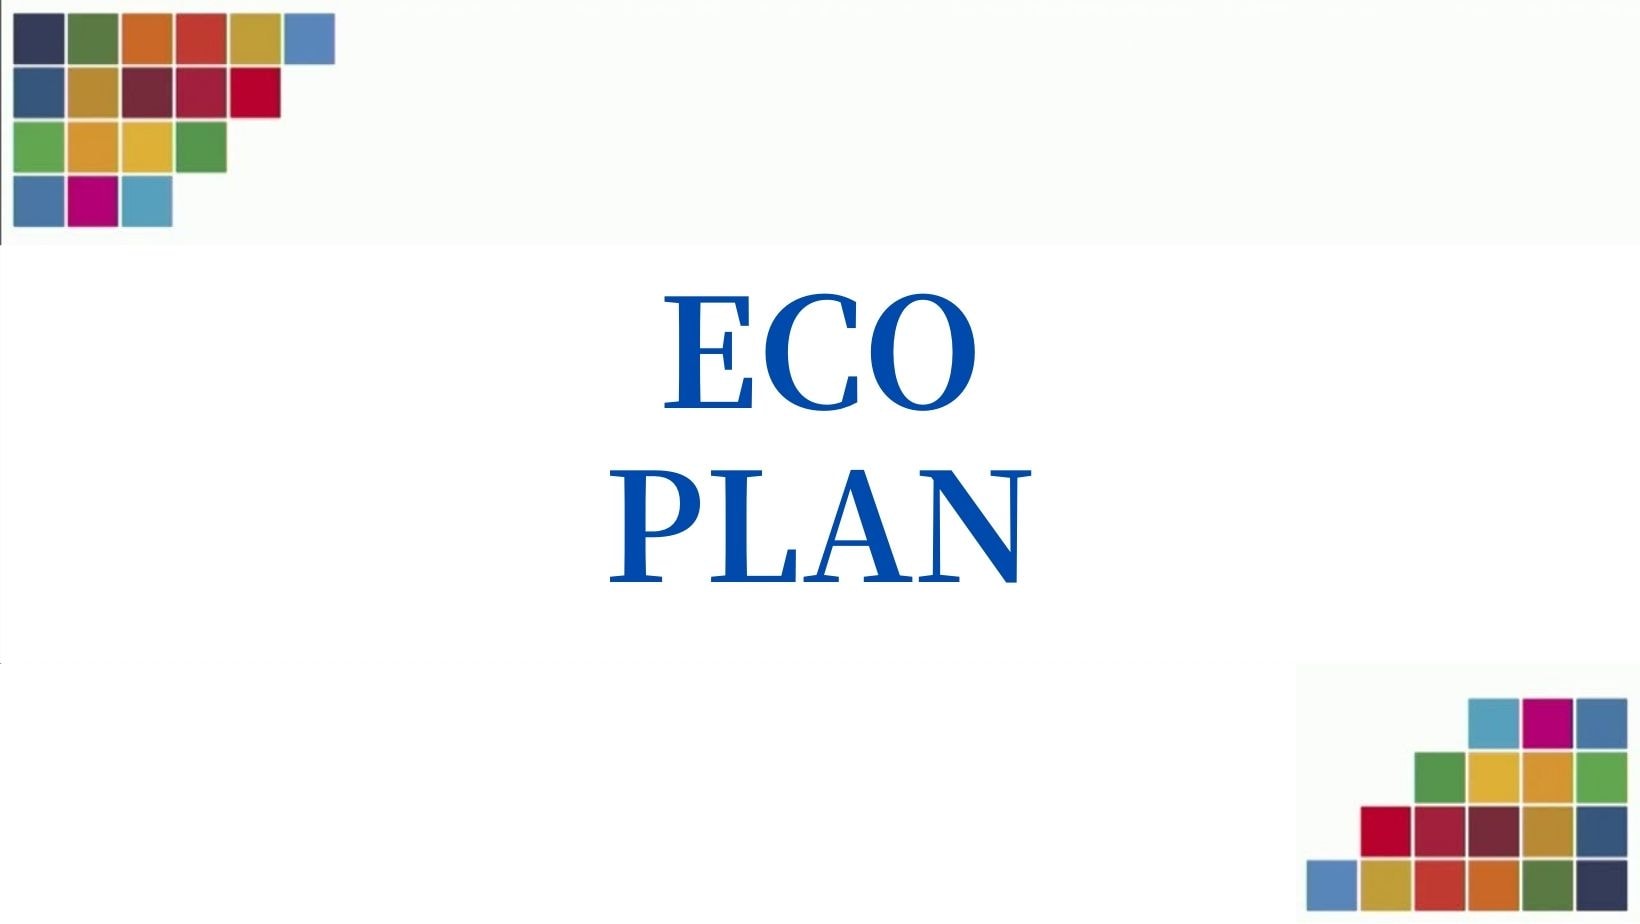 □ Eco-plan that is kind to the earth